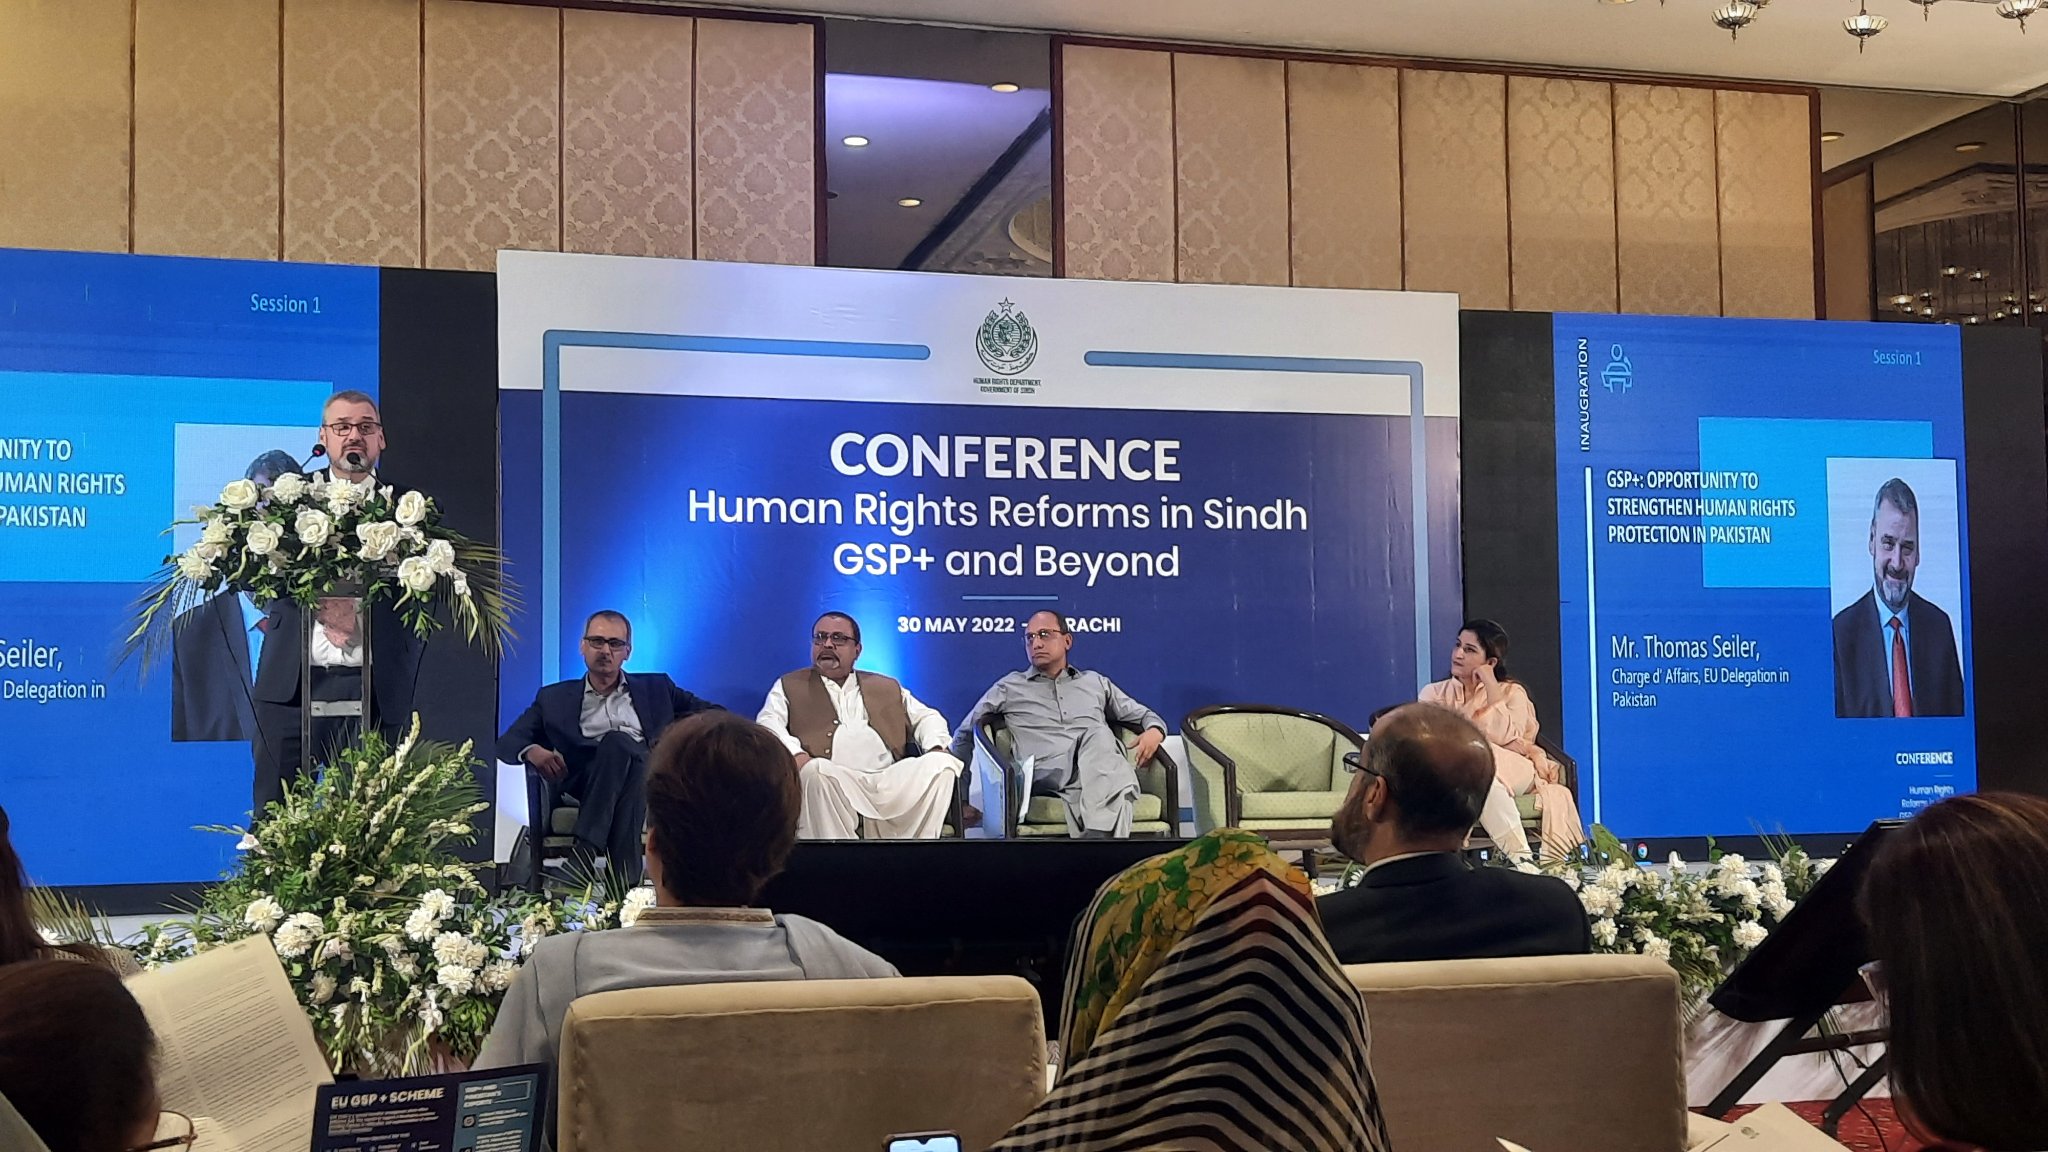 Human Rights reforms in Sindh GSP+ and Beyond